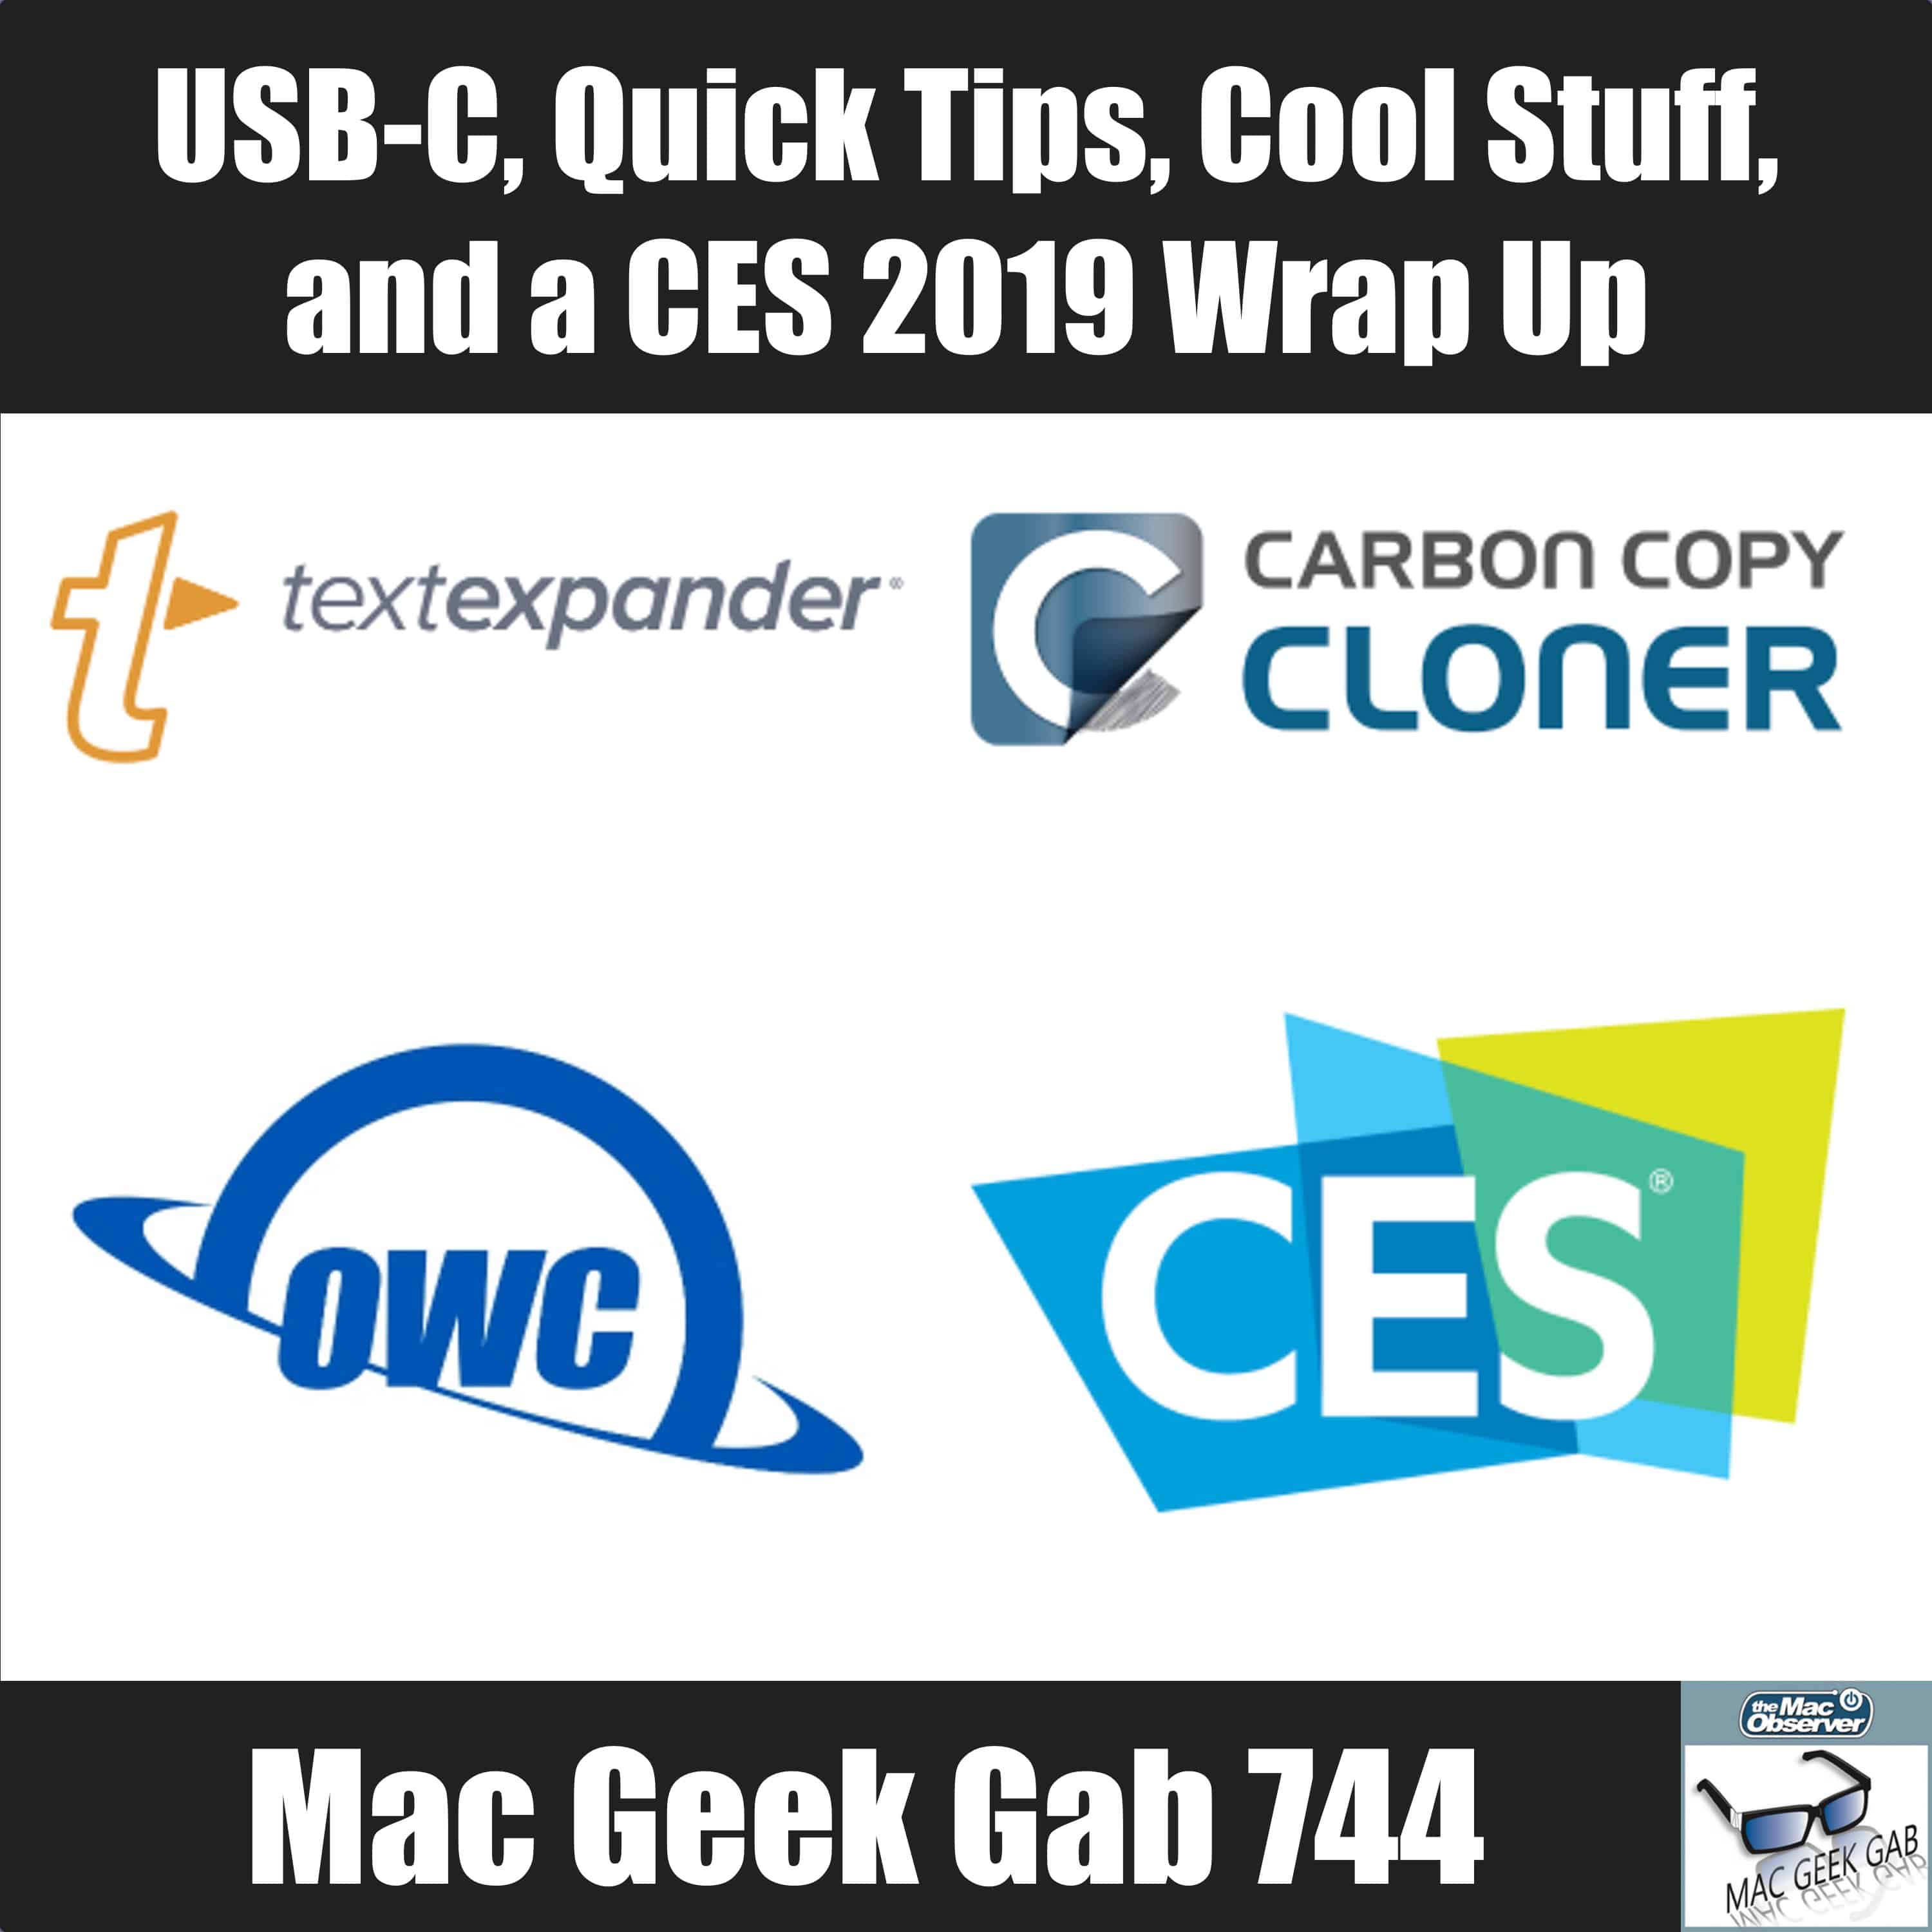 USB-C, Quick Tips, Cool Stuff, and a CES 2019 Wrap Up – Mac Geek Gab 744